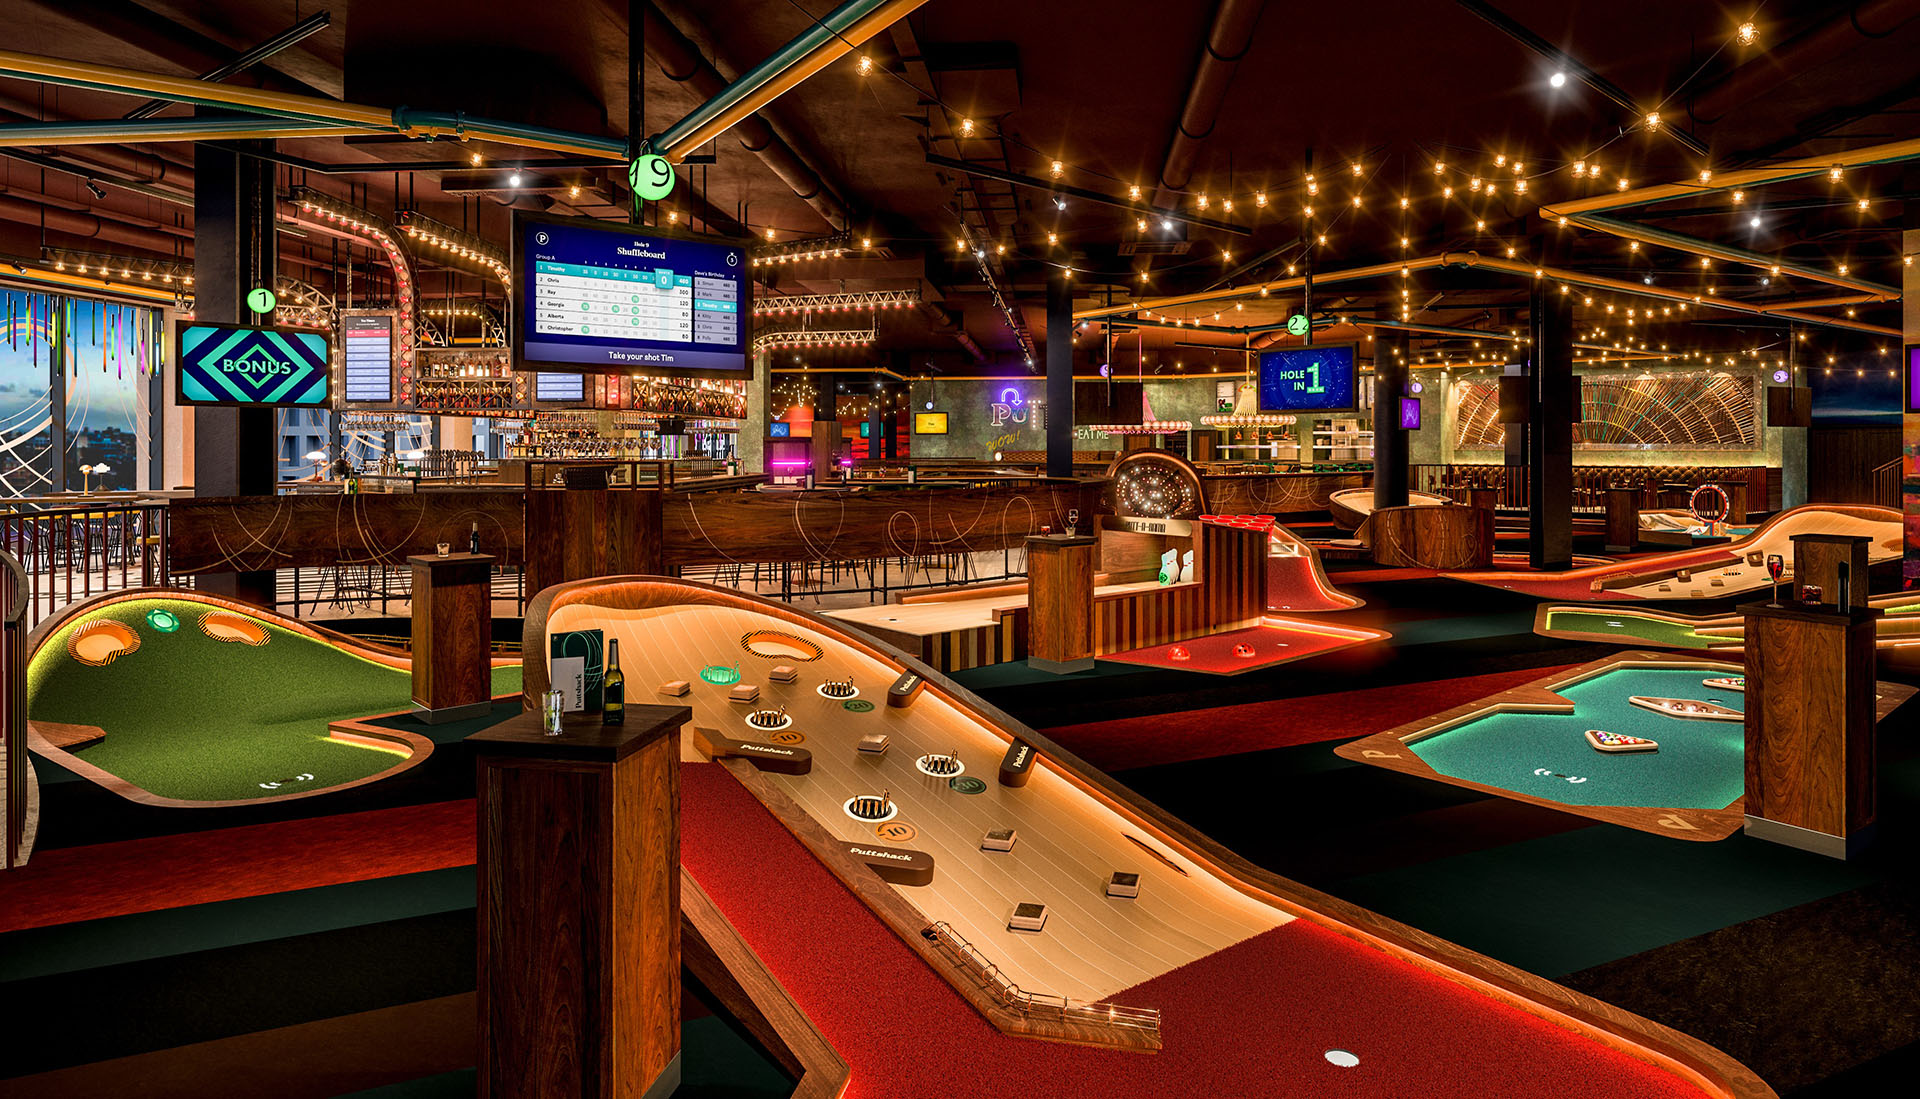 7775Puttshack’s new Social Mini-Golf venues are first of many to come stateside